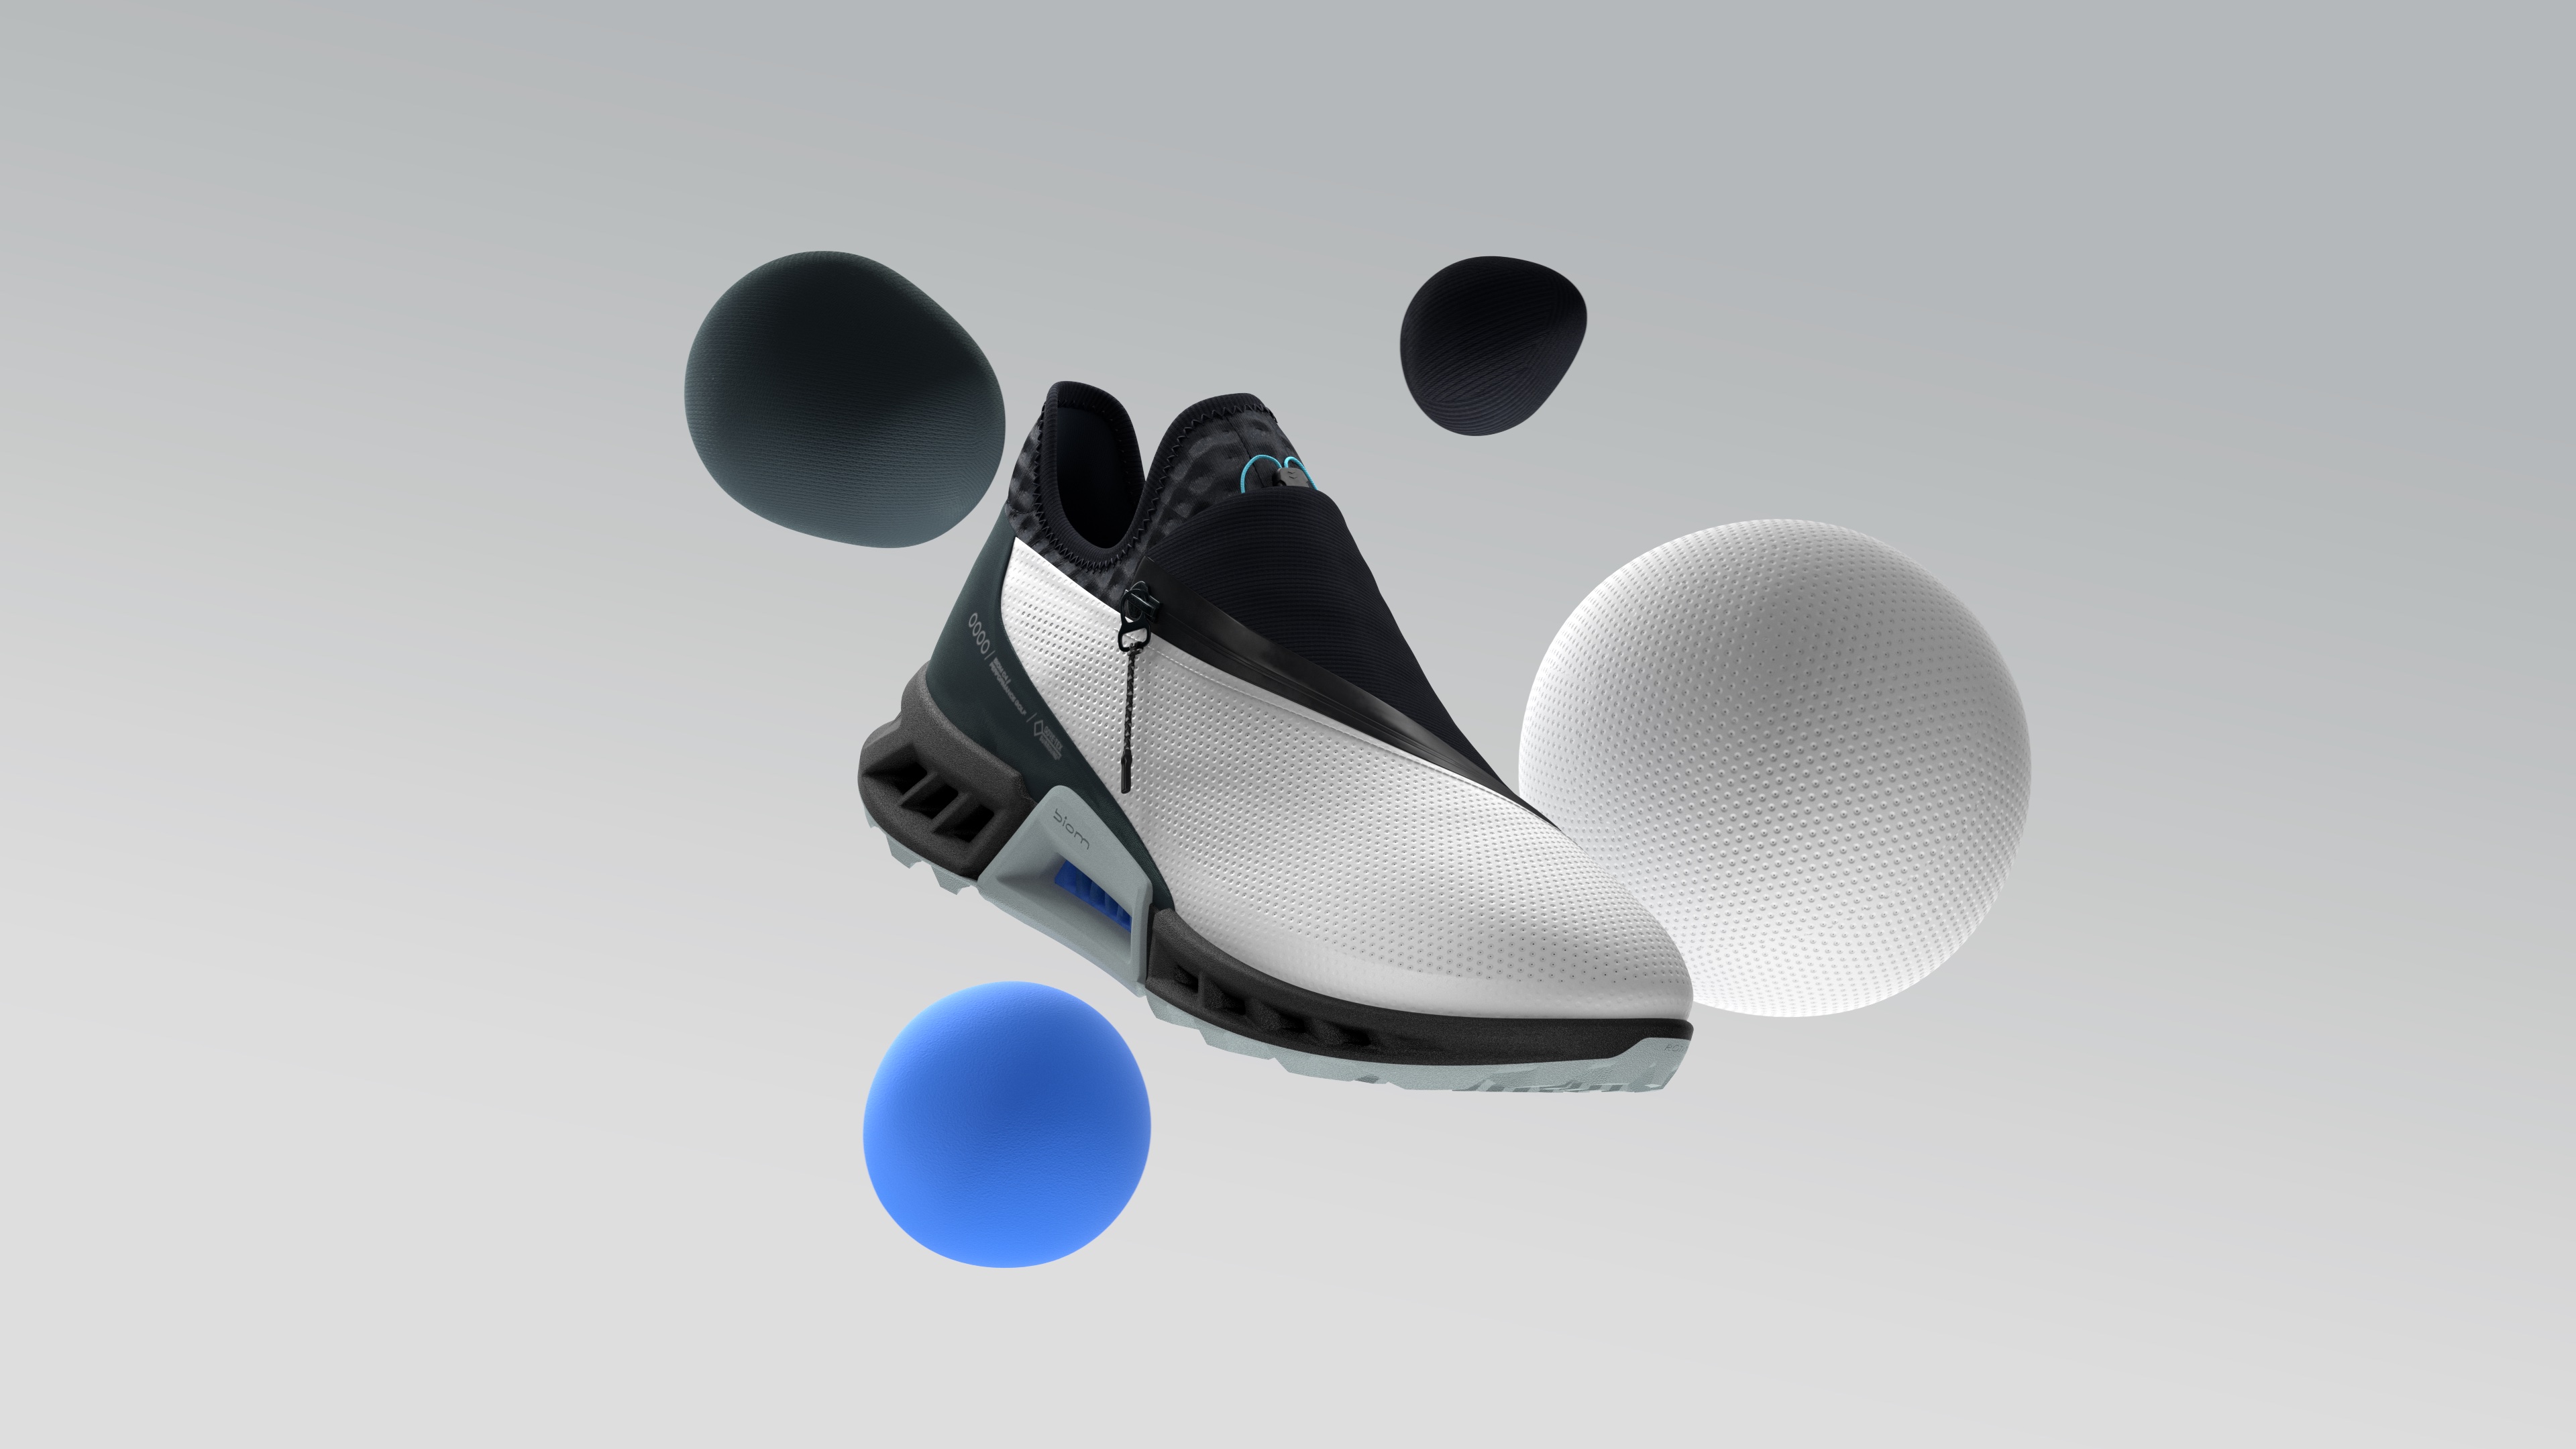 J.Lindeberg and team up on four futuristic shoe collaborations | Golf Equipment: Clubs, Bags | Golf Digest